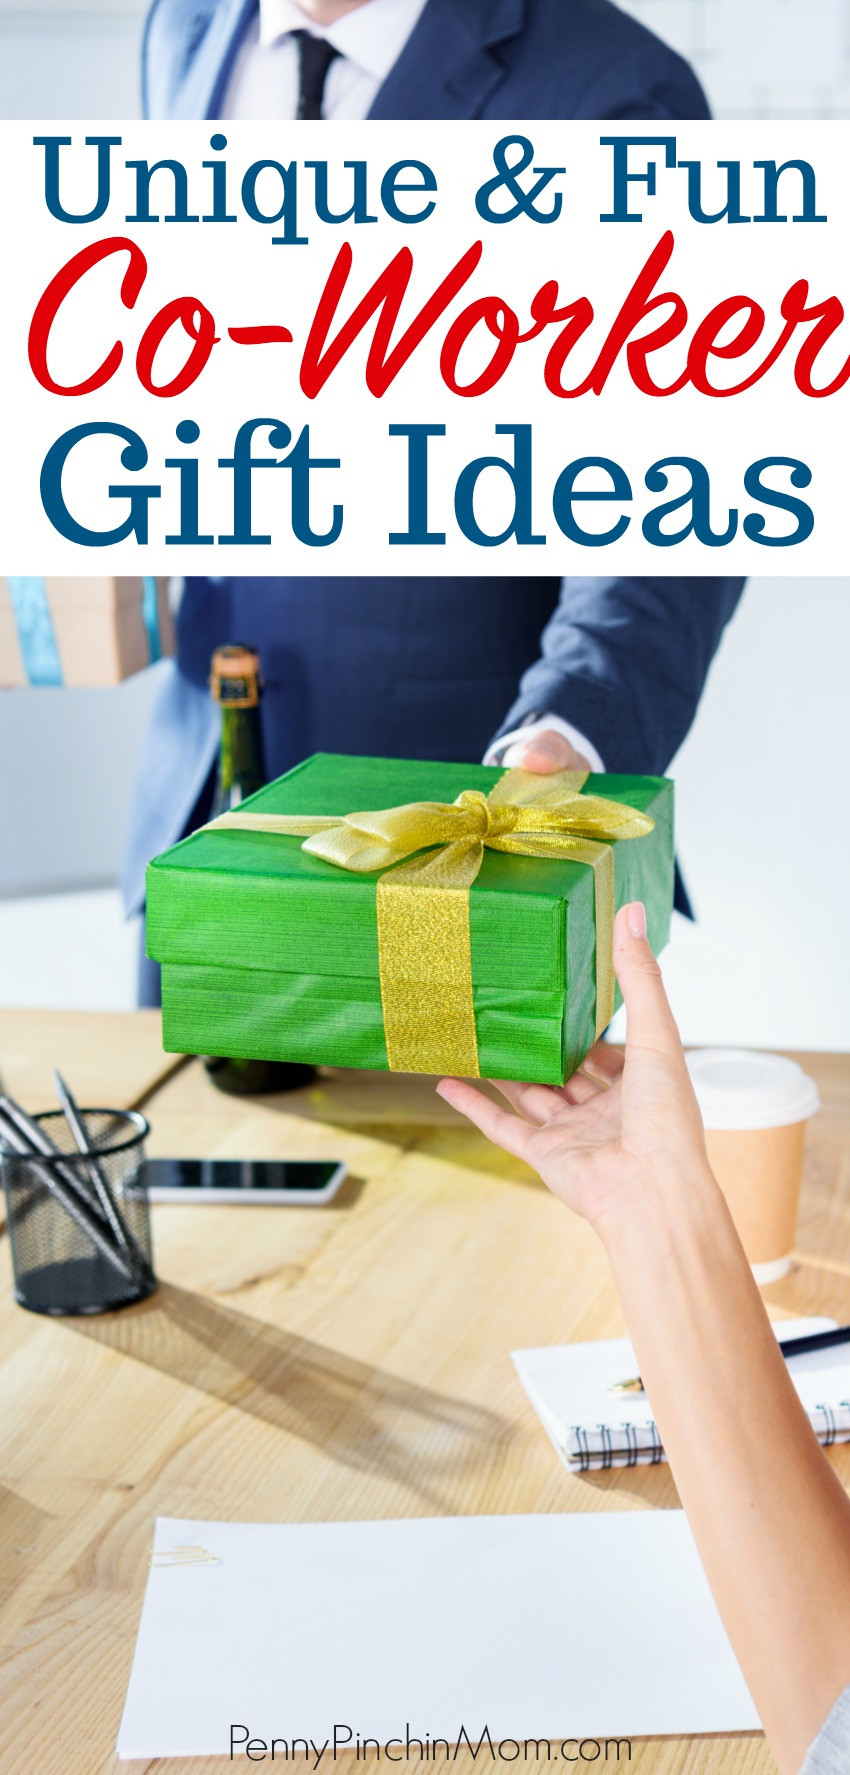 Co Worker Christmas Gift Ideas
 Co Worker Gift Ideas for Anyone on Your List This Year